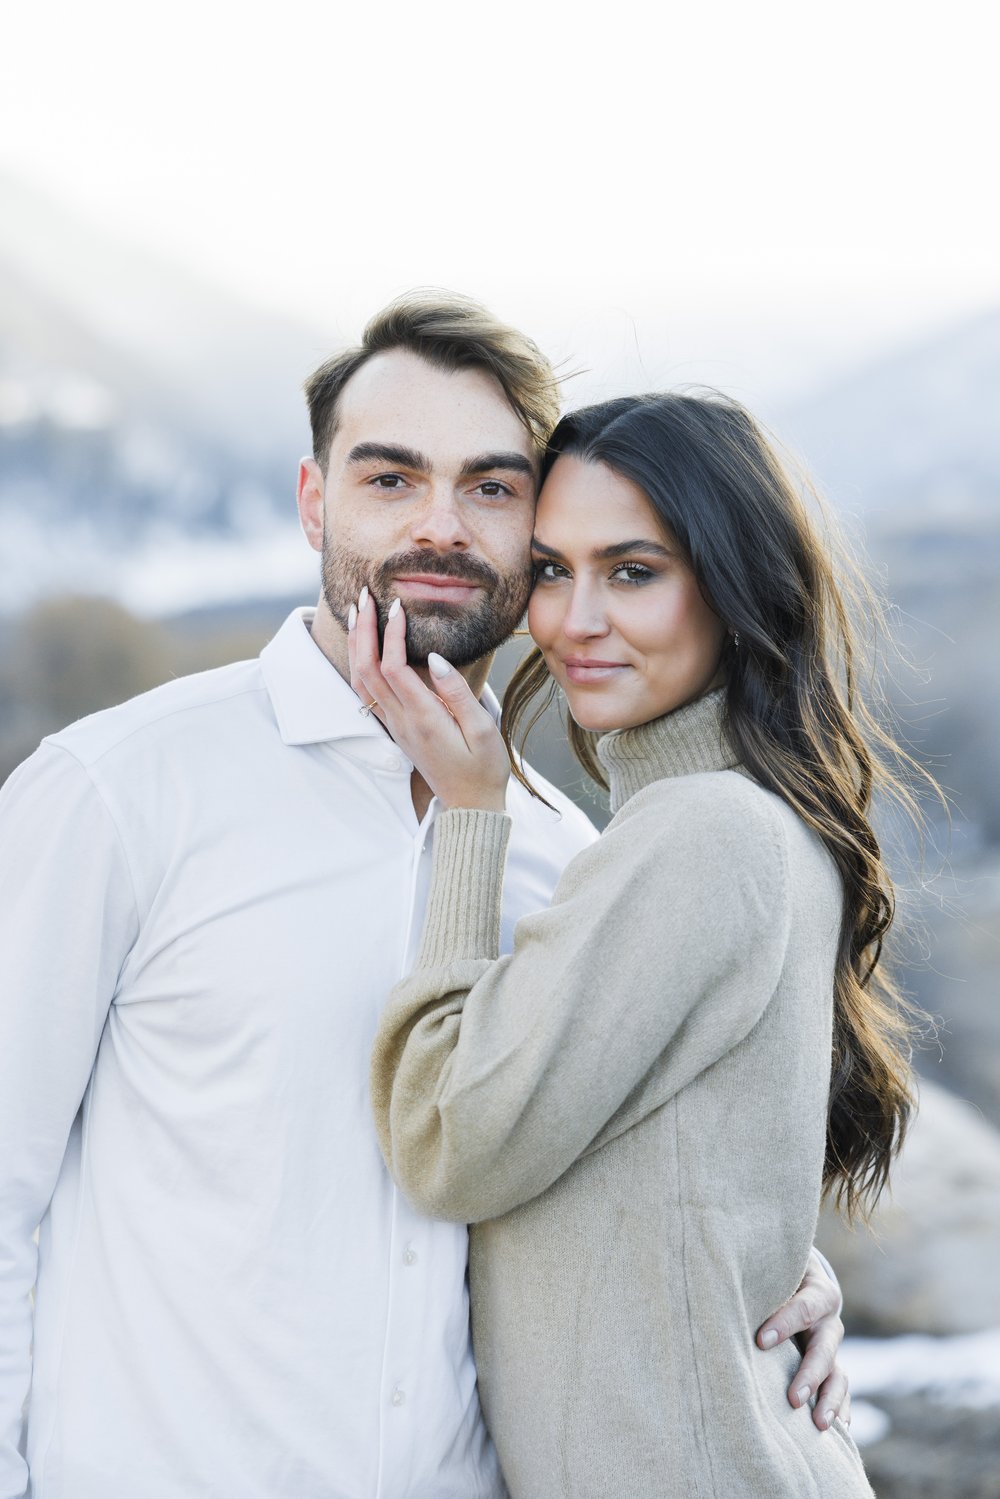  A woman and man snuggled together in the Utah mountains for a snowy proposal captured by Savanna Richardson Photography. clean portraits #SavannaRichardsonPhotography #Proposal #proposalphotography #ProProposalCompany #engaged #engagementphotography